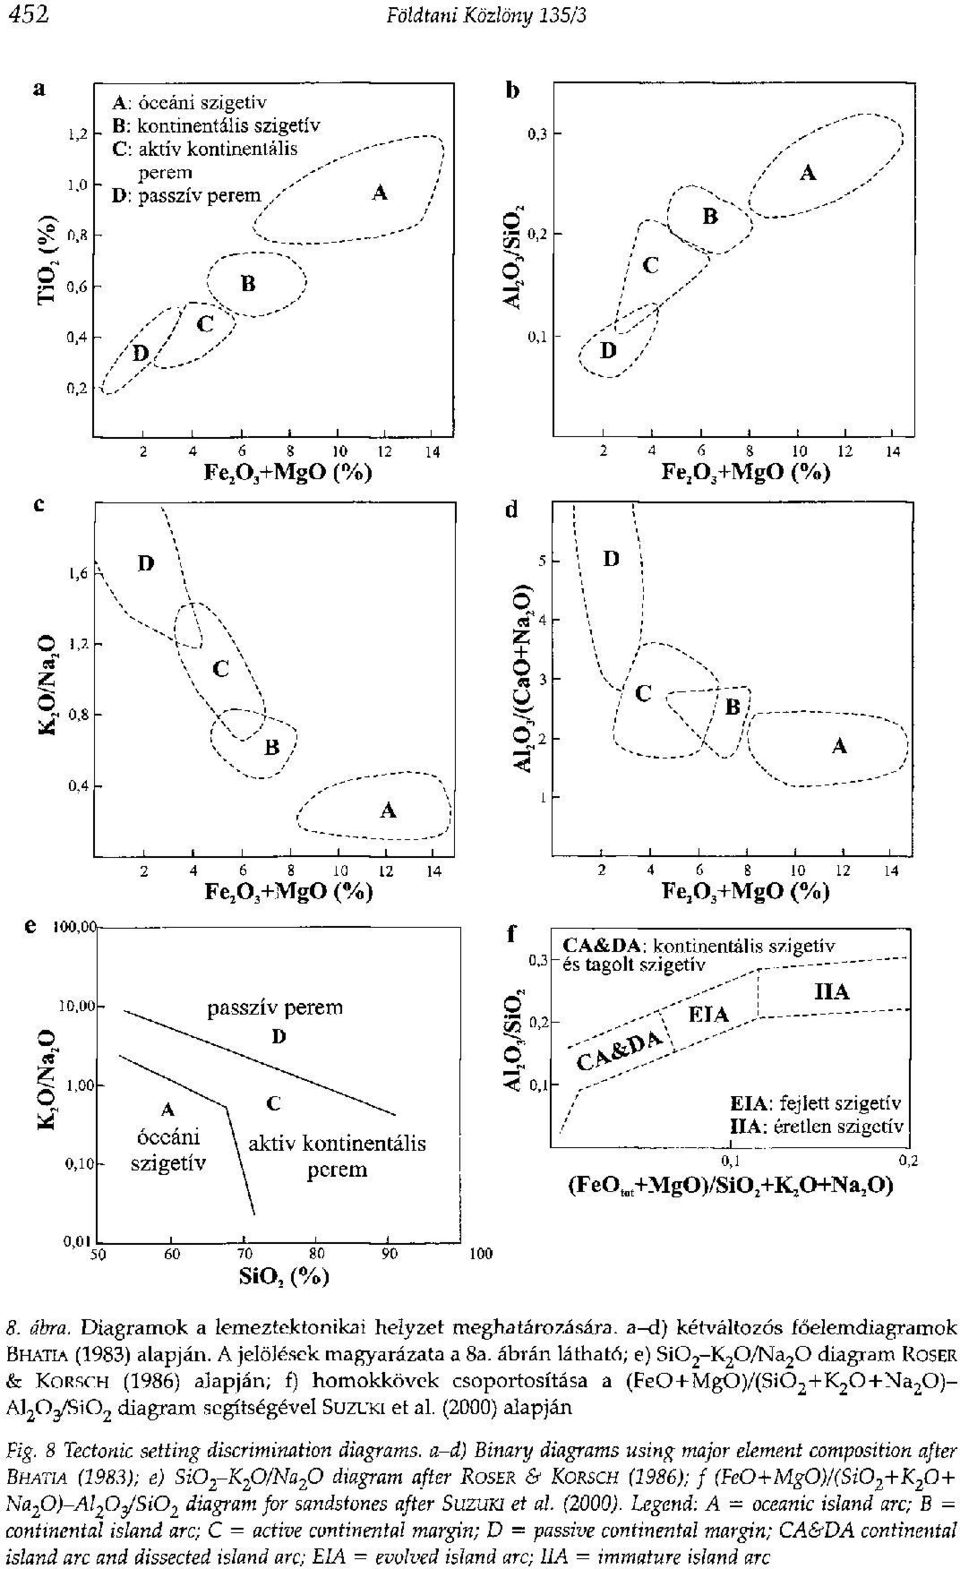 8 Tectonic setting discrimination diagrams, a-d) Binary diagrams using major element composition after BHATIA (1983); e) Si0 2-K 20/Na 20 diagram after ROSER & KORSCH (1986); f (FeO+MgO)/(SiO z+k 20+